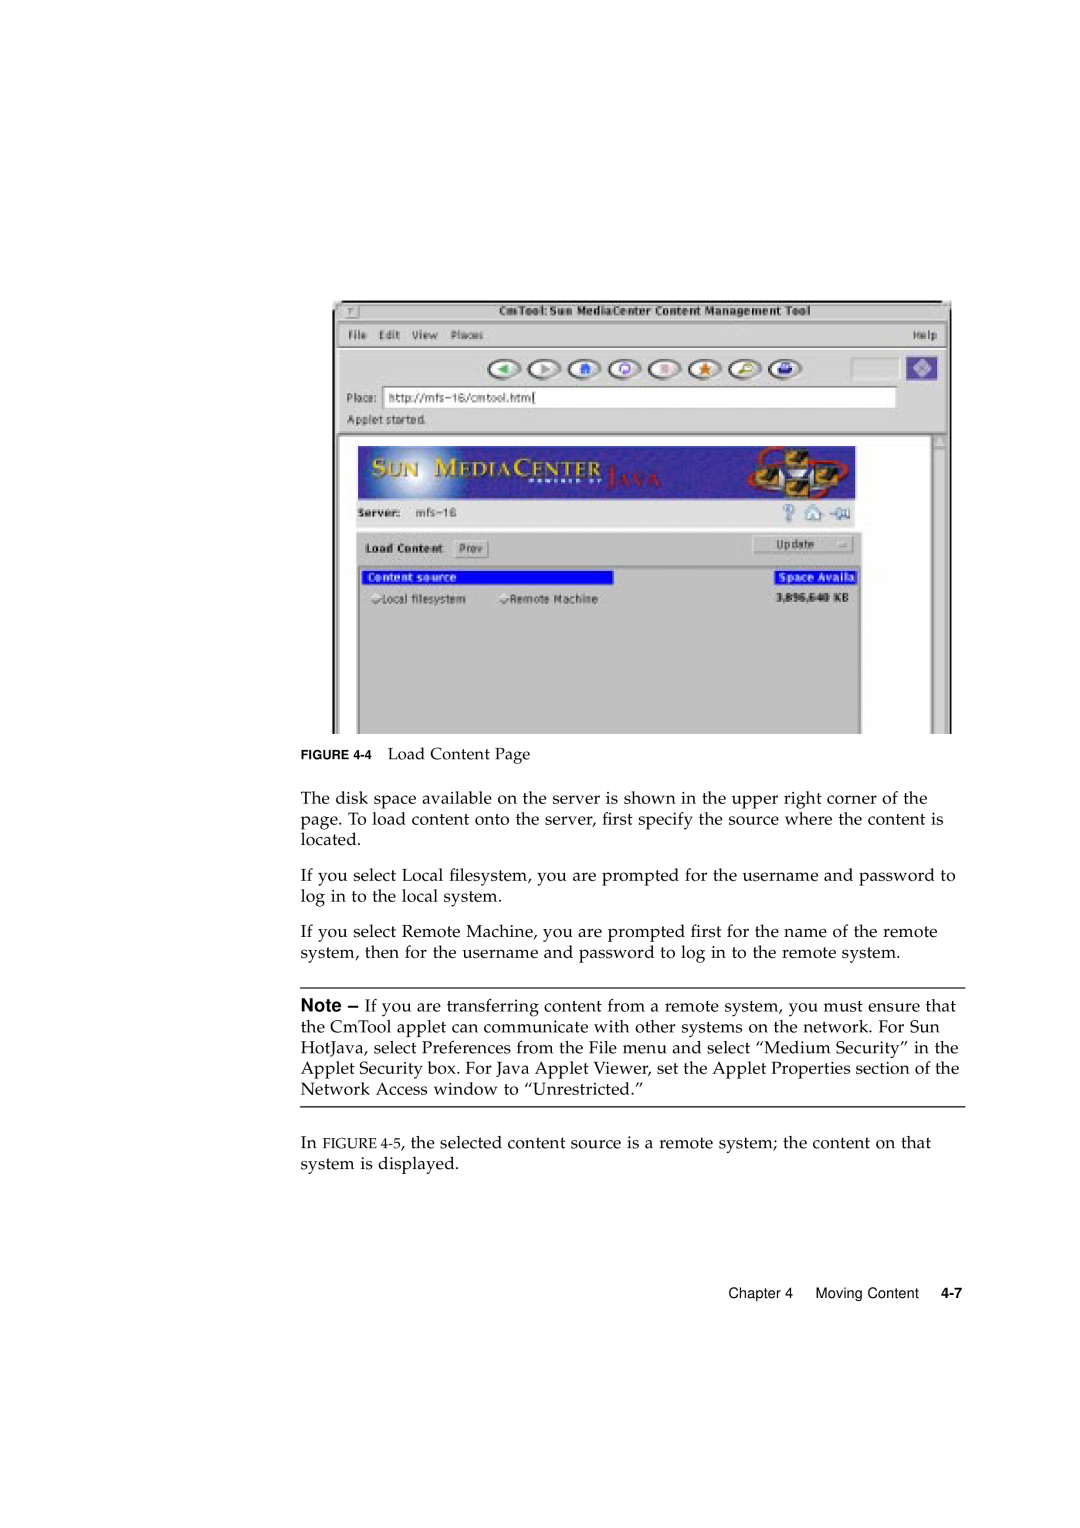 Sun Microsystems 2.1 manual 4 Load Content Page 